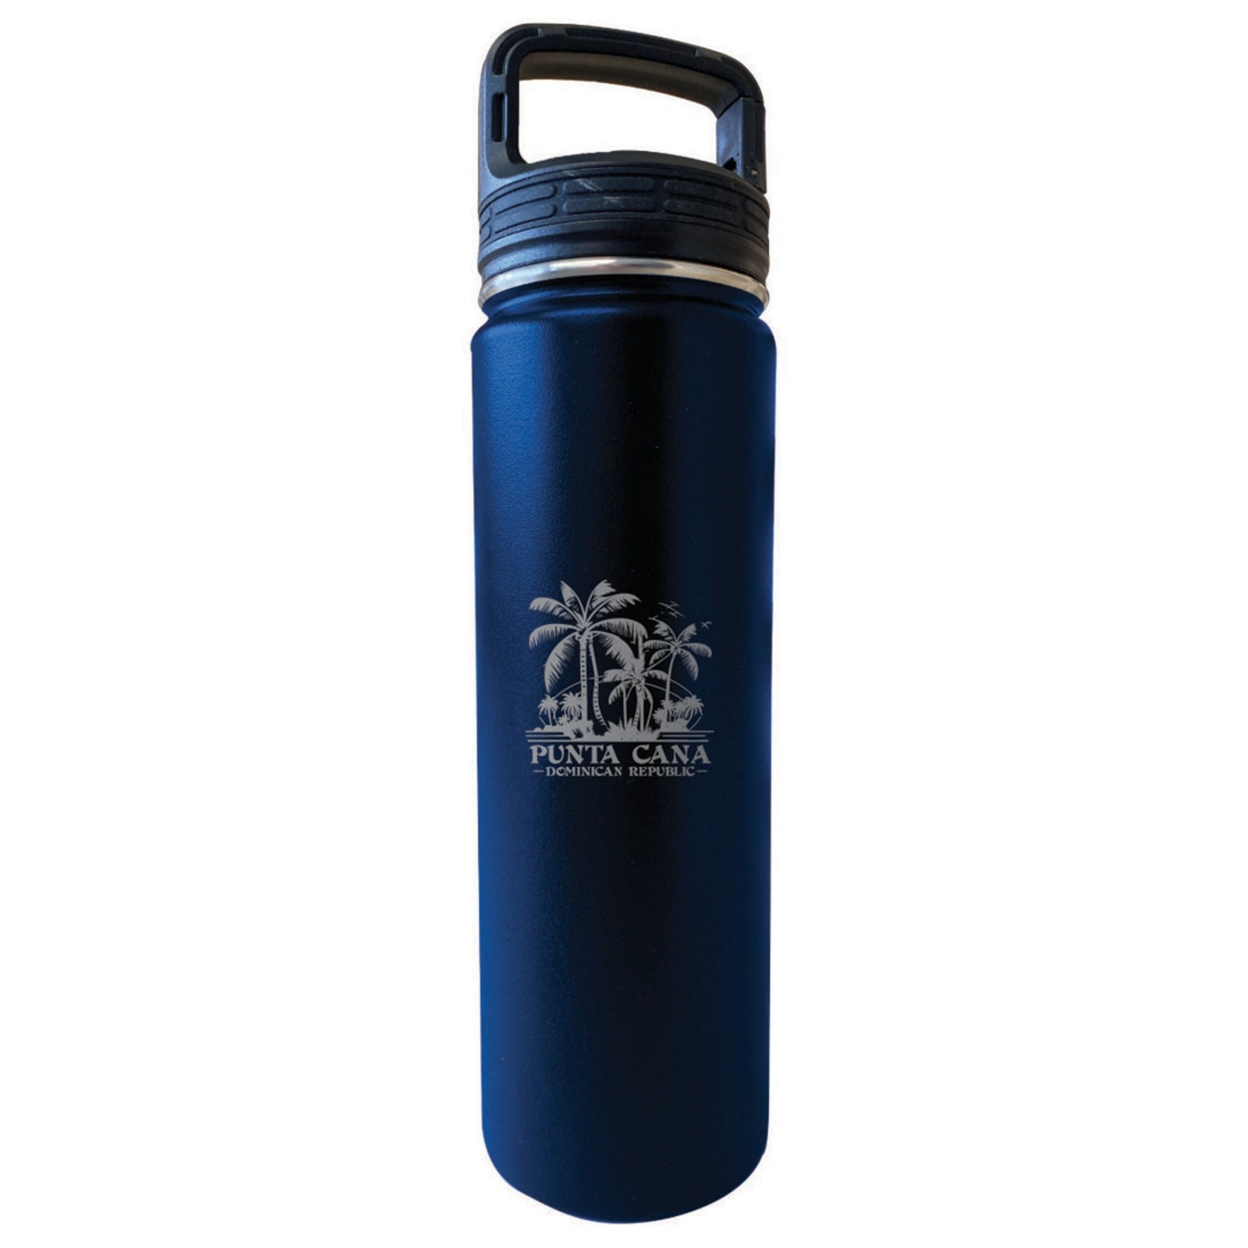 Punta Cana Dominican Republic Souvenir 32 Oz Insulated Stainless Steel Tumbler - Black, Palm 3